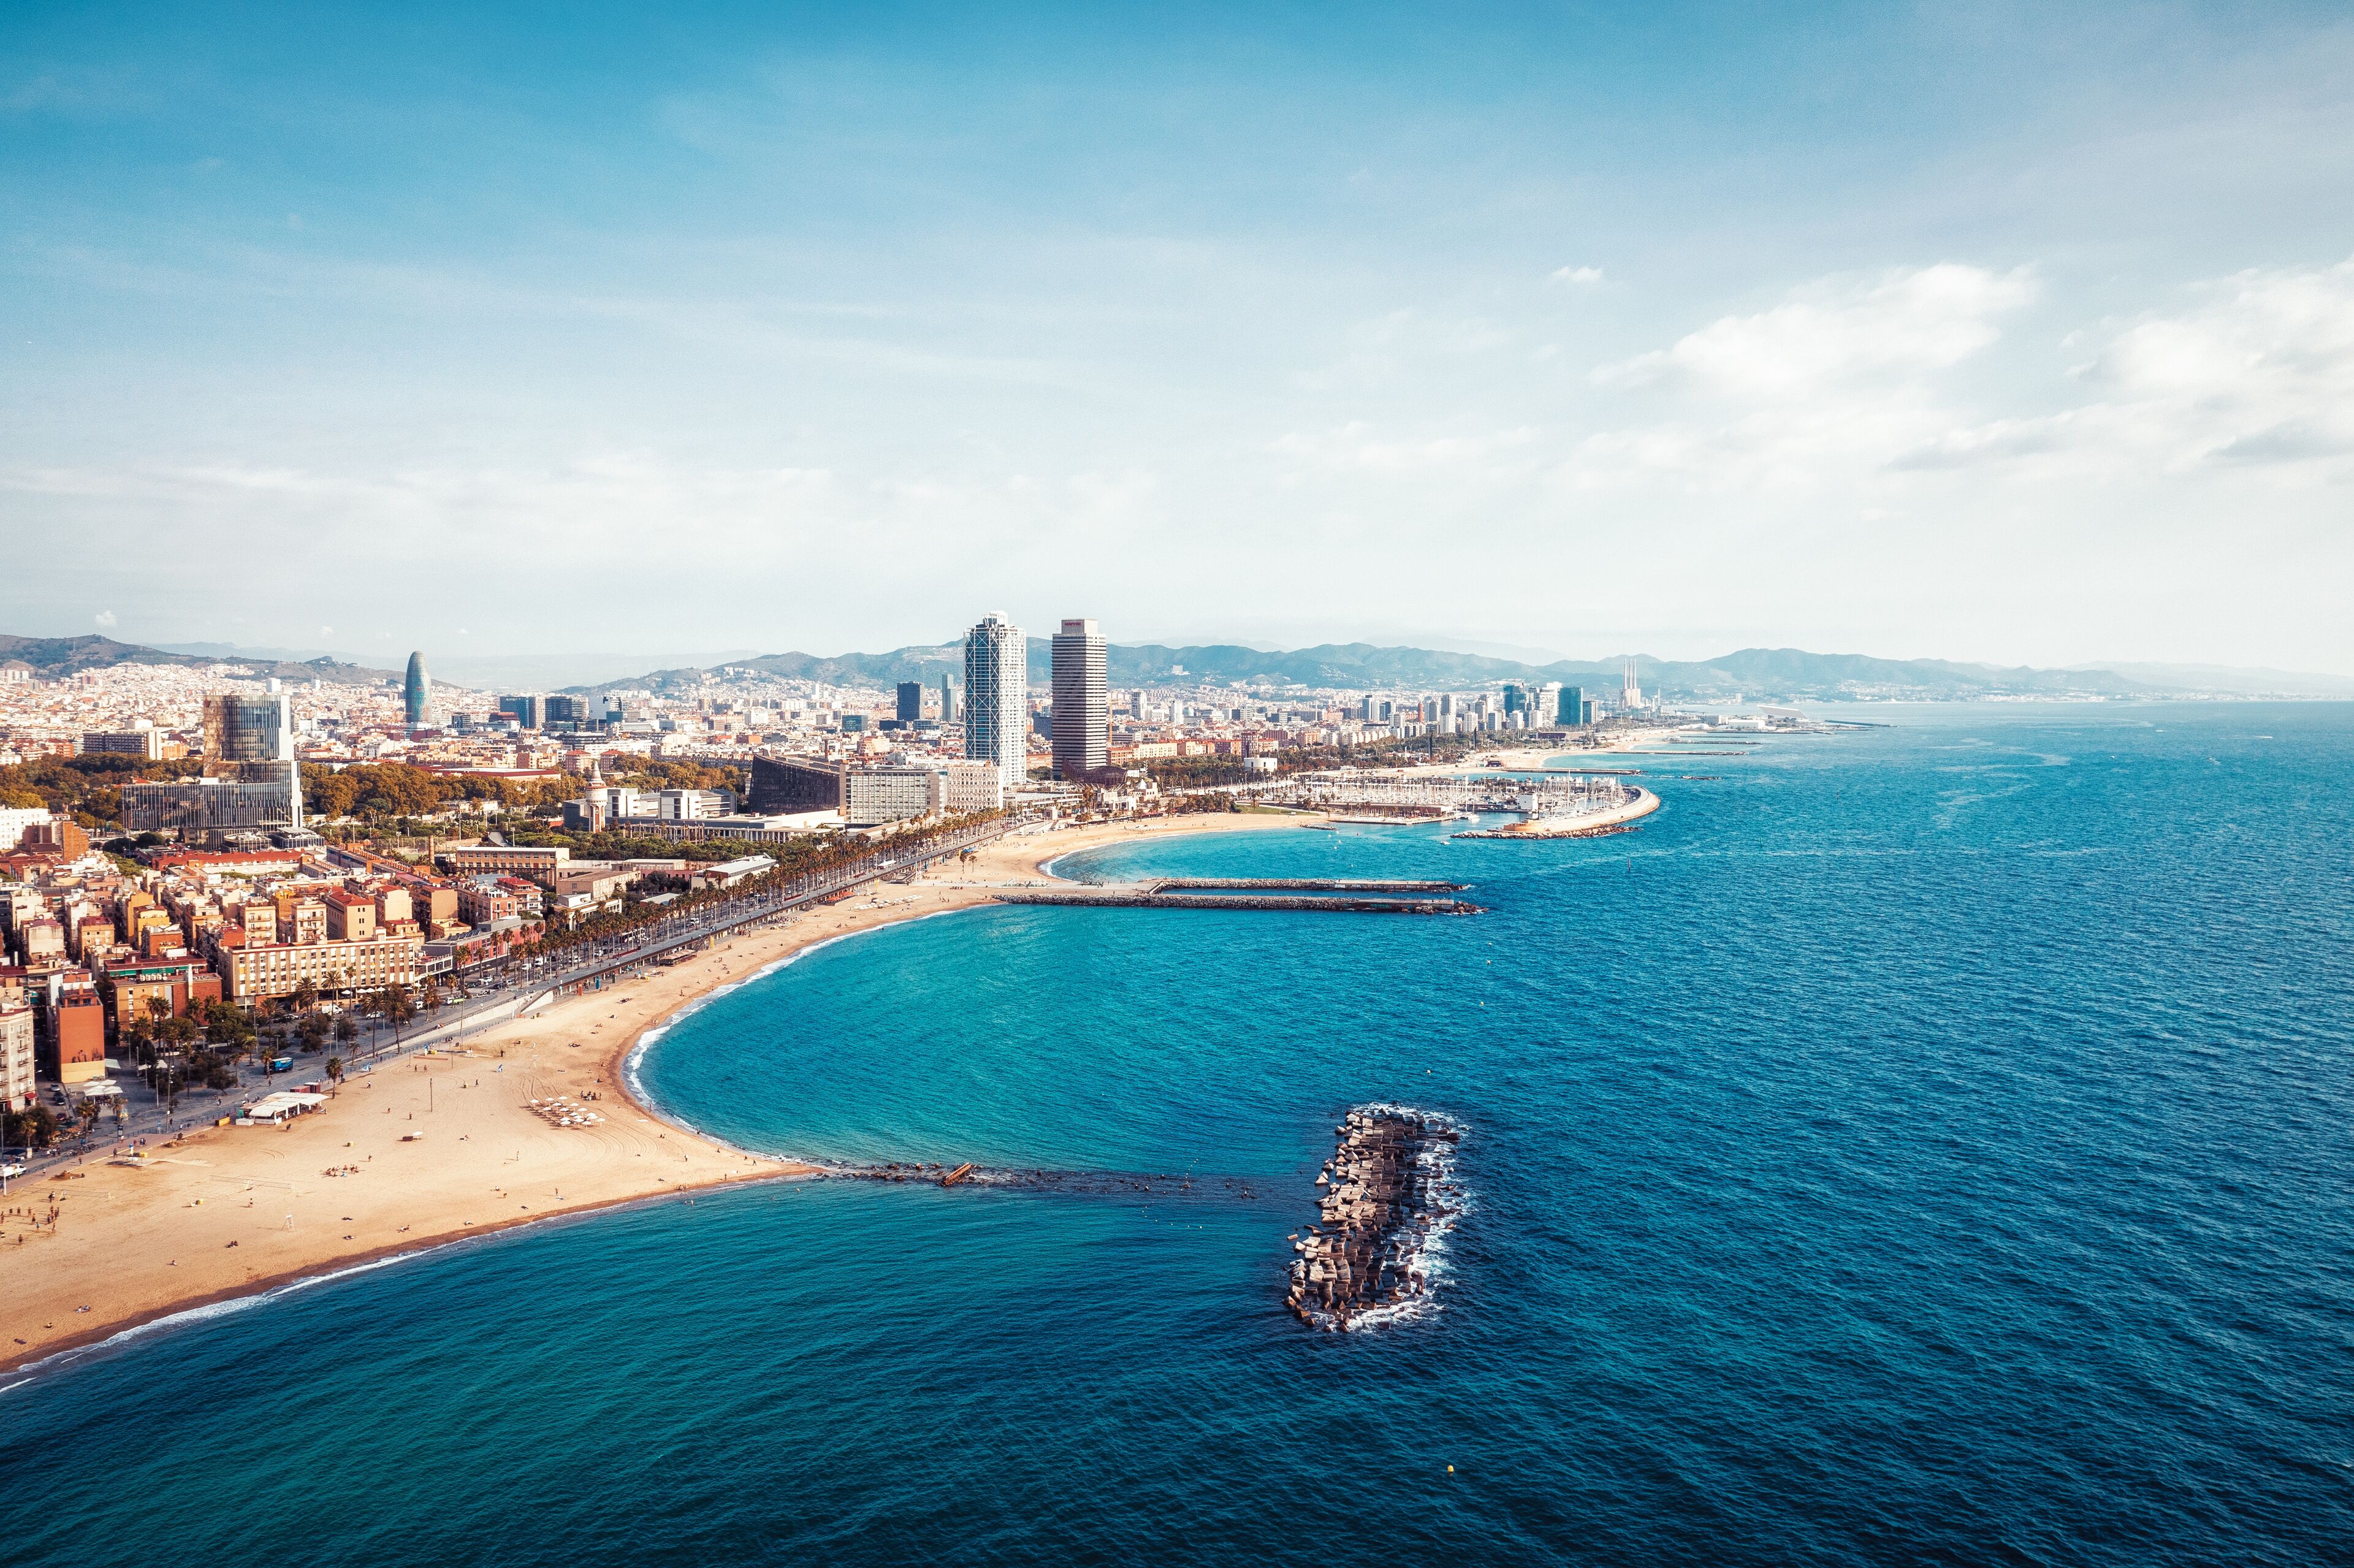 Photo taken at the Barcelona Beach by drone device